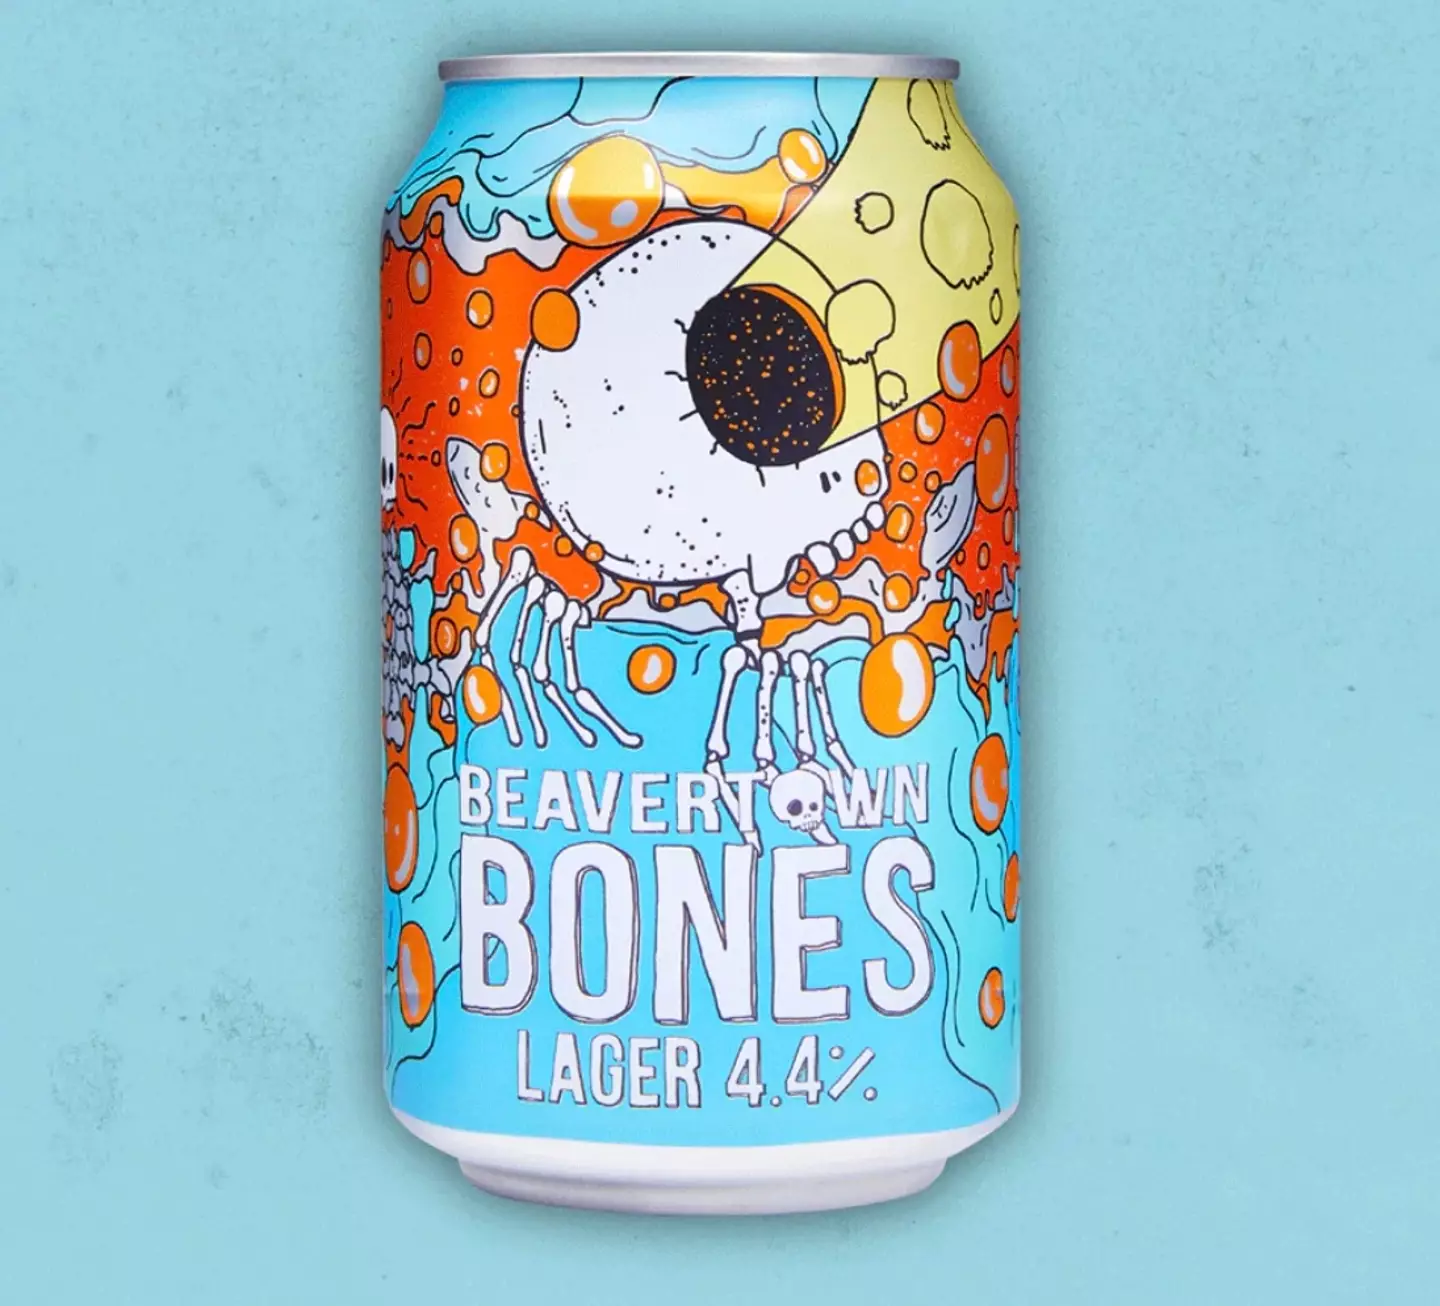 You could get a free pint of Bones lager this weekend.